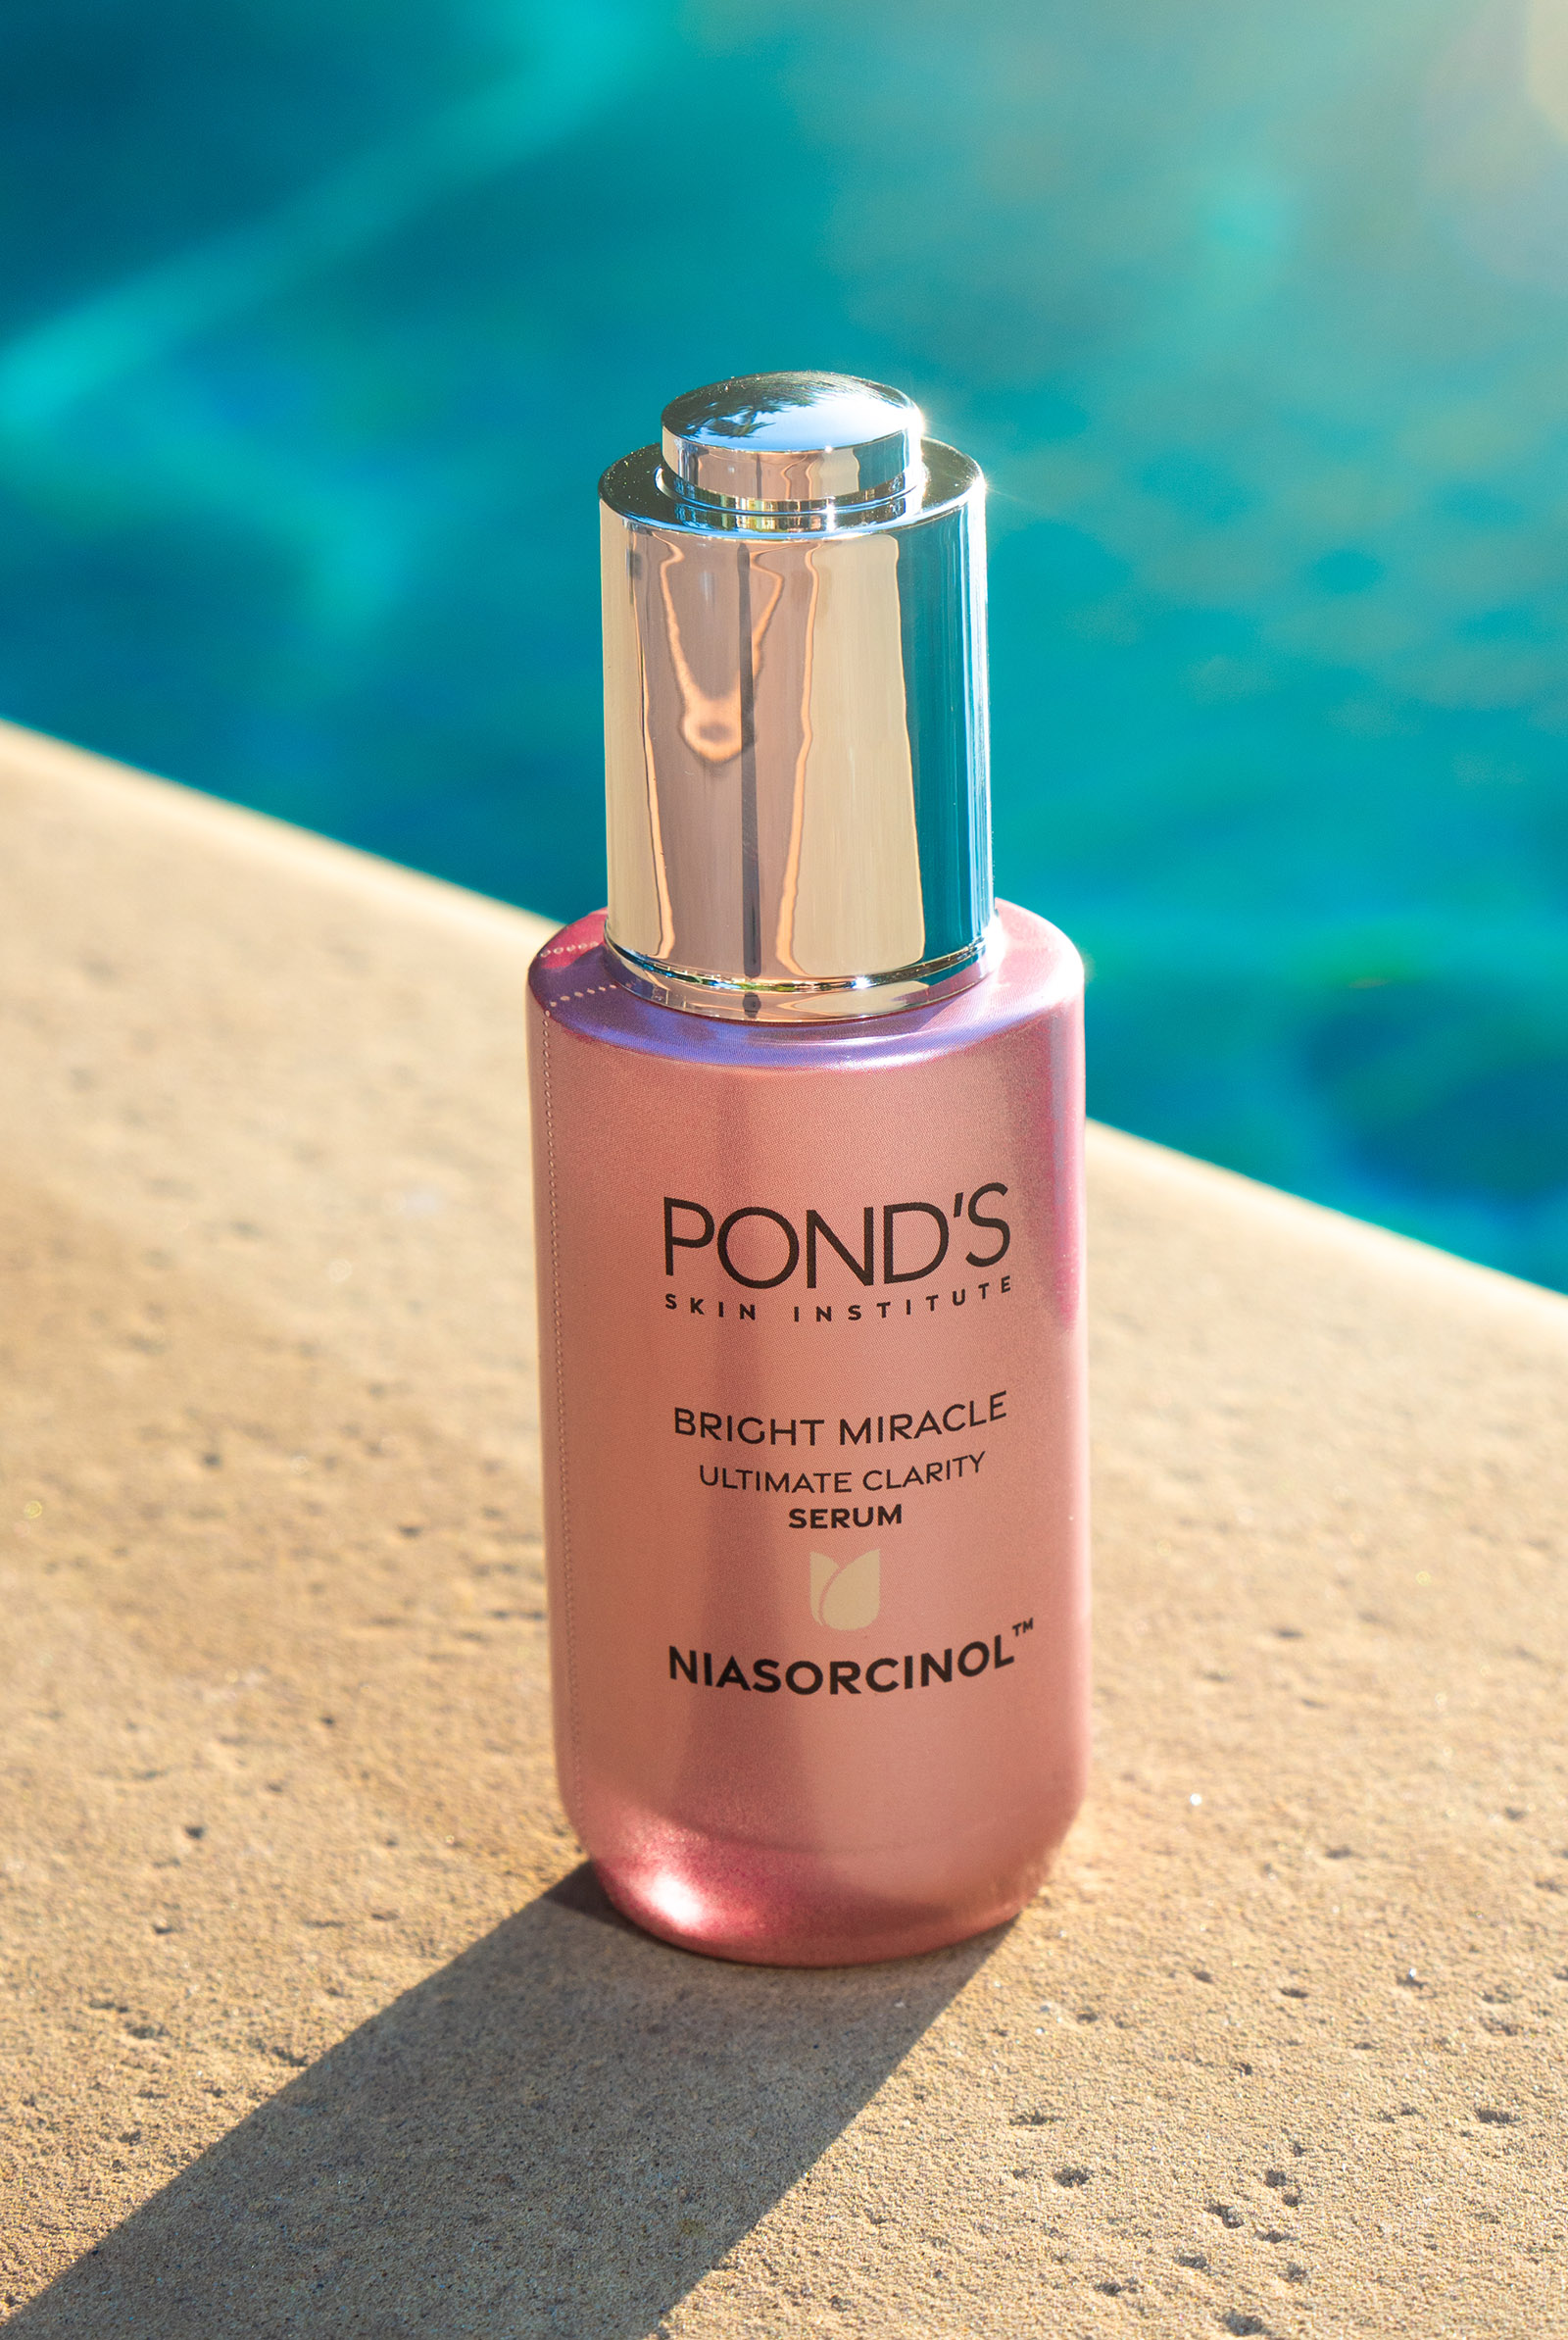 Pond's Ultimate Clarity Serum with Niasorcinol is the secret to brighter skin